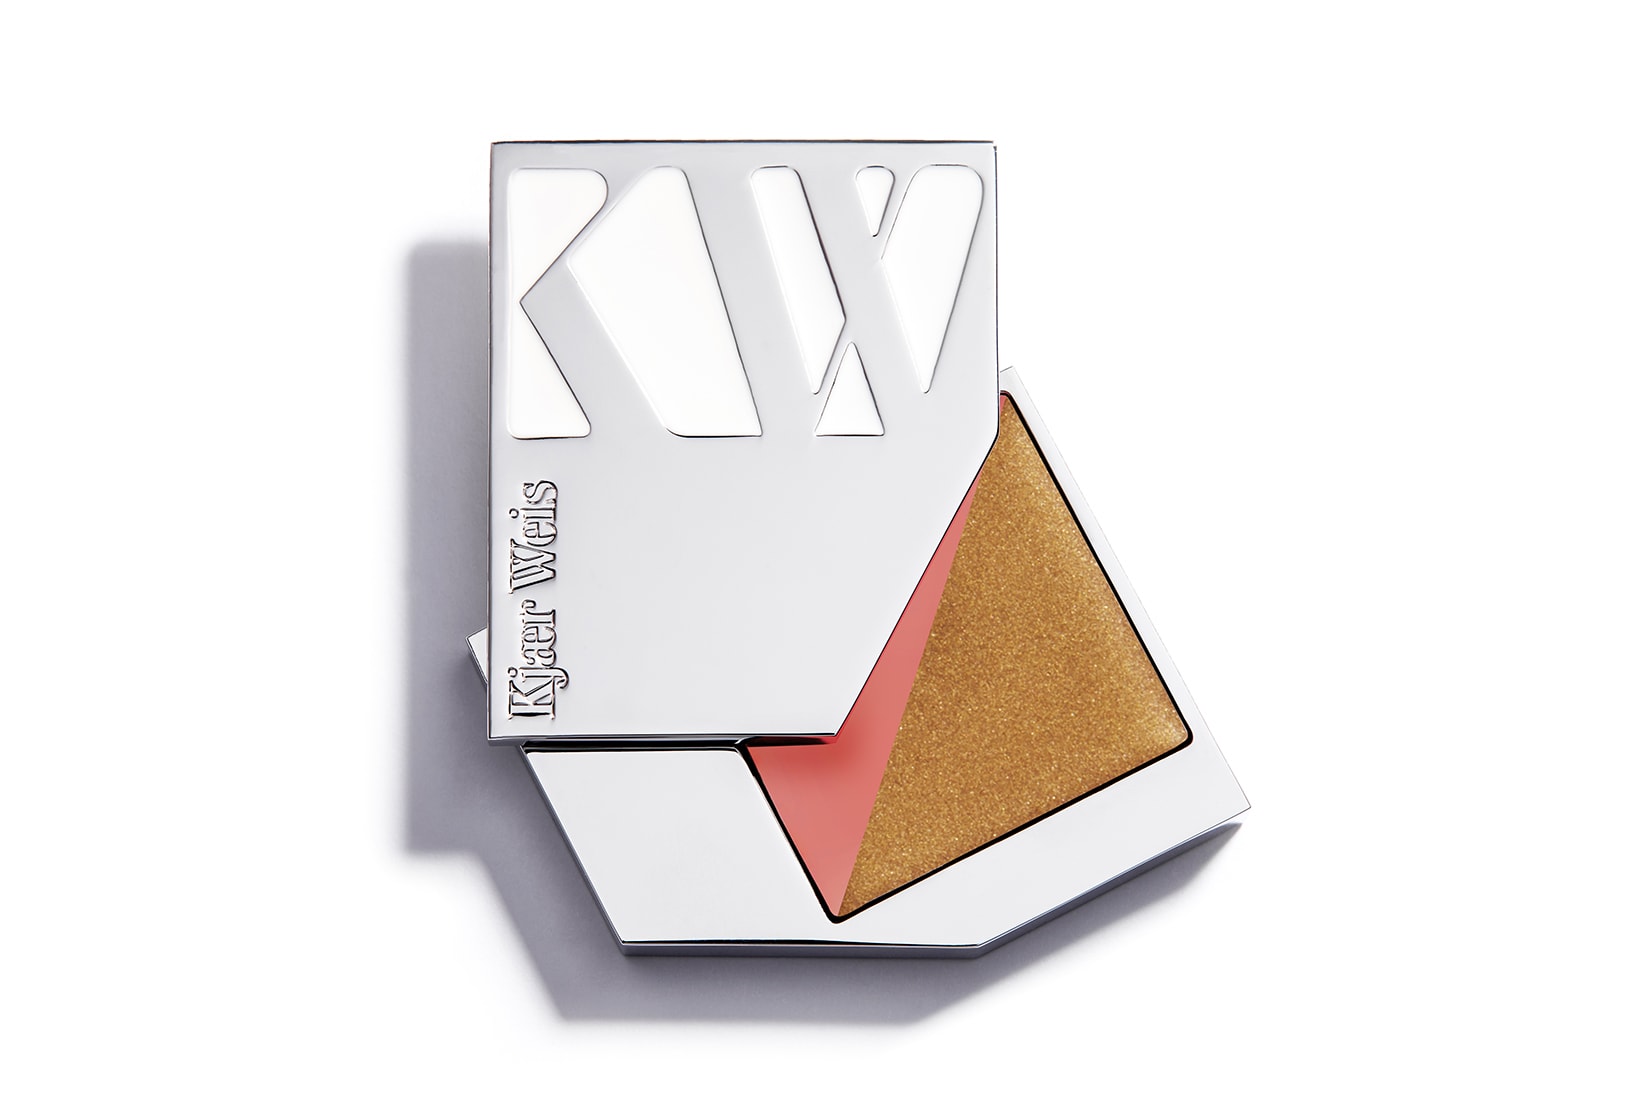 kjaer weis nude naturally collection lipsticks clean beauty makeup organic cosmetics sustainable